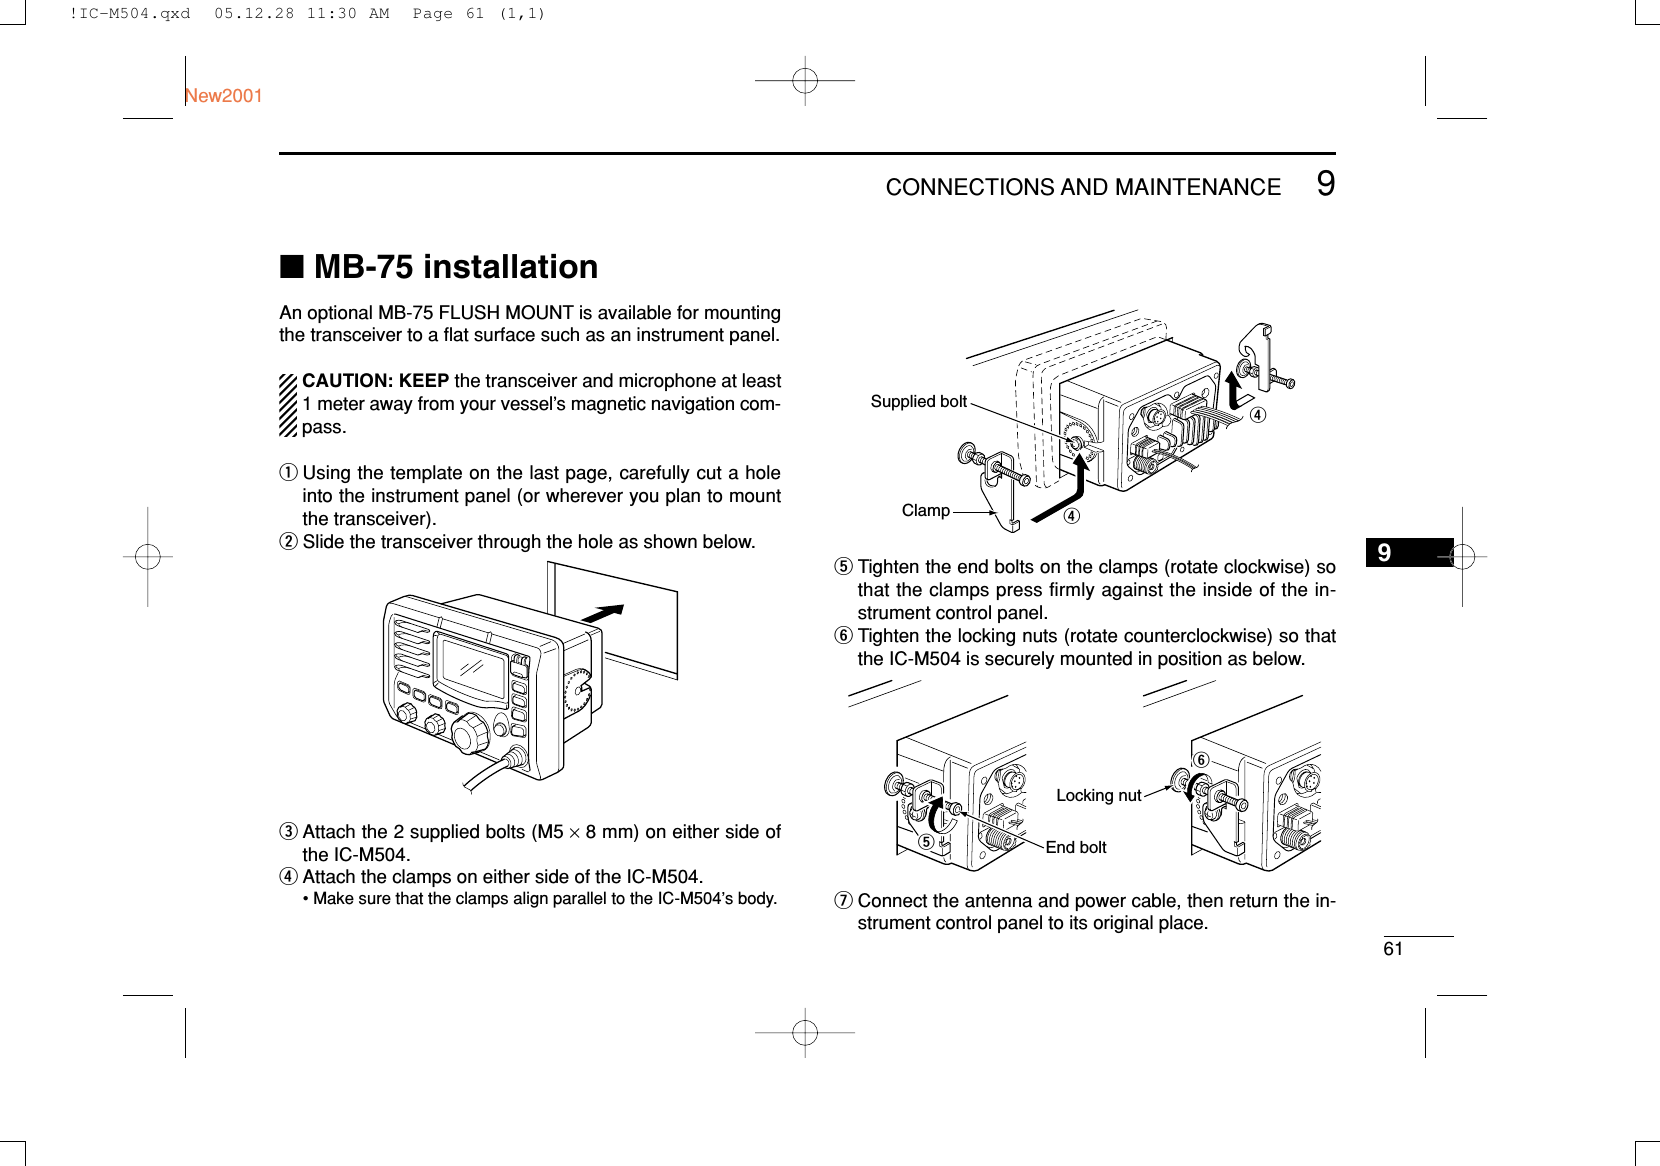 619CONNECTIONS AND MAINTENANCENew20019■MB-75 installationAn optional MB-75 FLUSH MOUNT is available for mountingthe transceiver to a ﬂat surface such as an instrument panel.CAUTION: KEEP the transceiver and microphone at least1 meter away from your vessel’s magnetic navigation com-pass.qUsing the template on the last page, carefully cut a holeinto the instrument panel (or wherever you plan to mountthe transceiver).wSlide the transceiver through the hole as shown below.eAttach the 2 supplied bolts (M5 ×8 mm) on either side ofthe IC-M504.rAttach the clamps on either side of the IC-M504.• Make sure that the clamps align parallel to the IC-M504’s body.tTighten the end bolts on the clamps (rotate clockwise) sothat the clamps press firmly against the inside of the in-strument control panel.yTighten the locking nuts (rotate counterclockwise) so thatthe IC-M504 is securely mounted in position as below.uConnect the antenna and power cable, then return the in-strument control panel to its original place.tyEnd boltLocking nutrrClampSupplied bolt!IC-M504.qxd  05.12.28 11:30 AM  Page 61 (1,1)